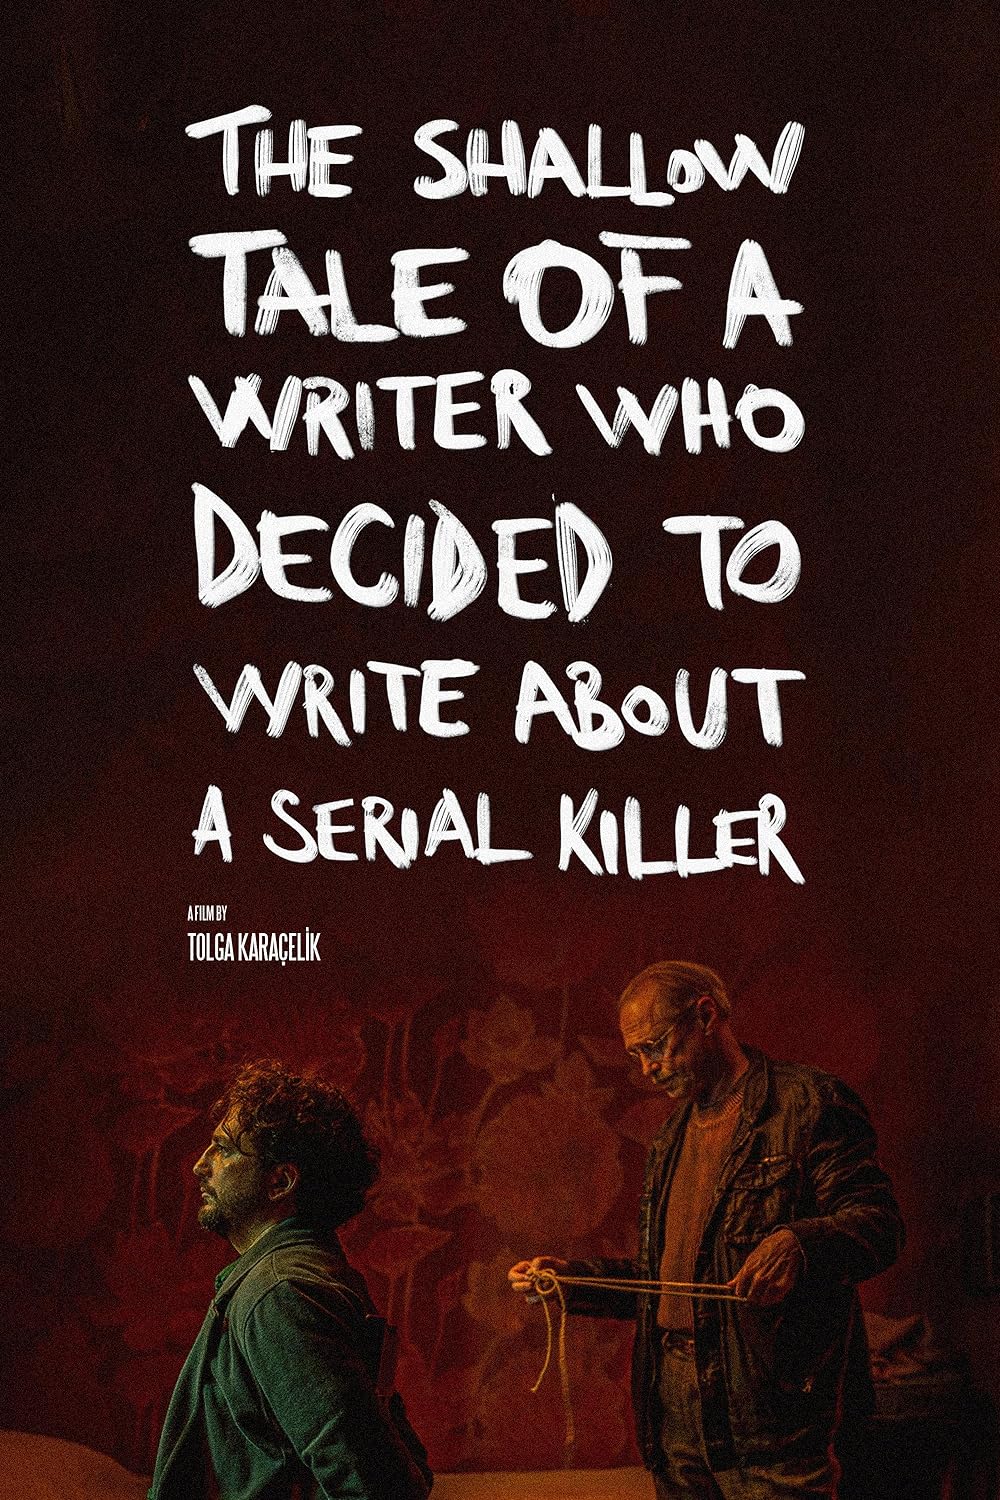 The Shallow Tale of a Writer Who Decided to Write About a Serial Killer